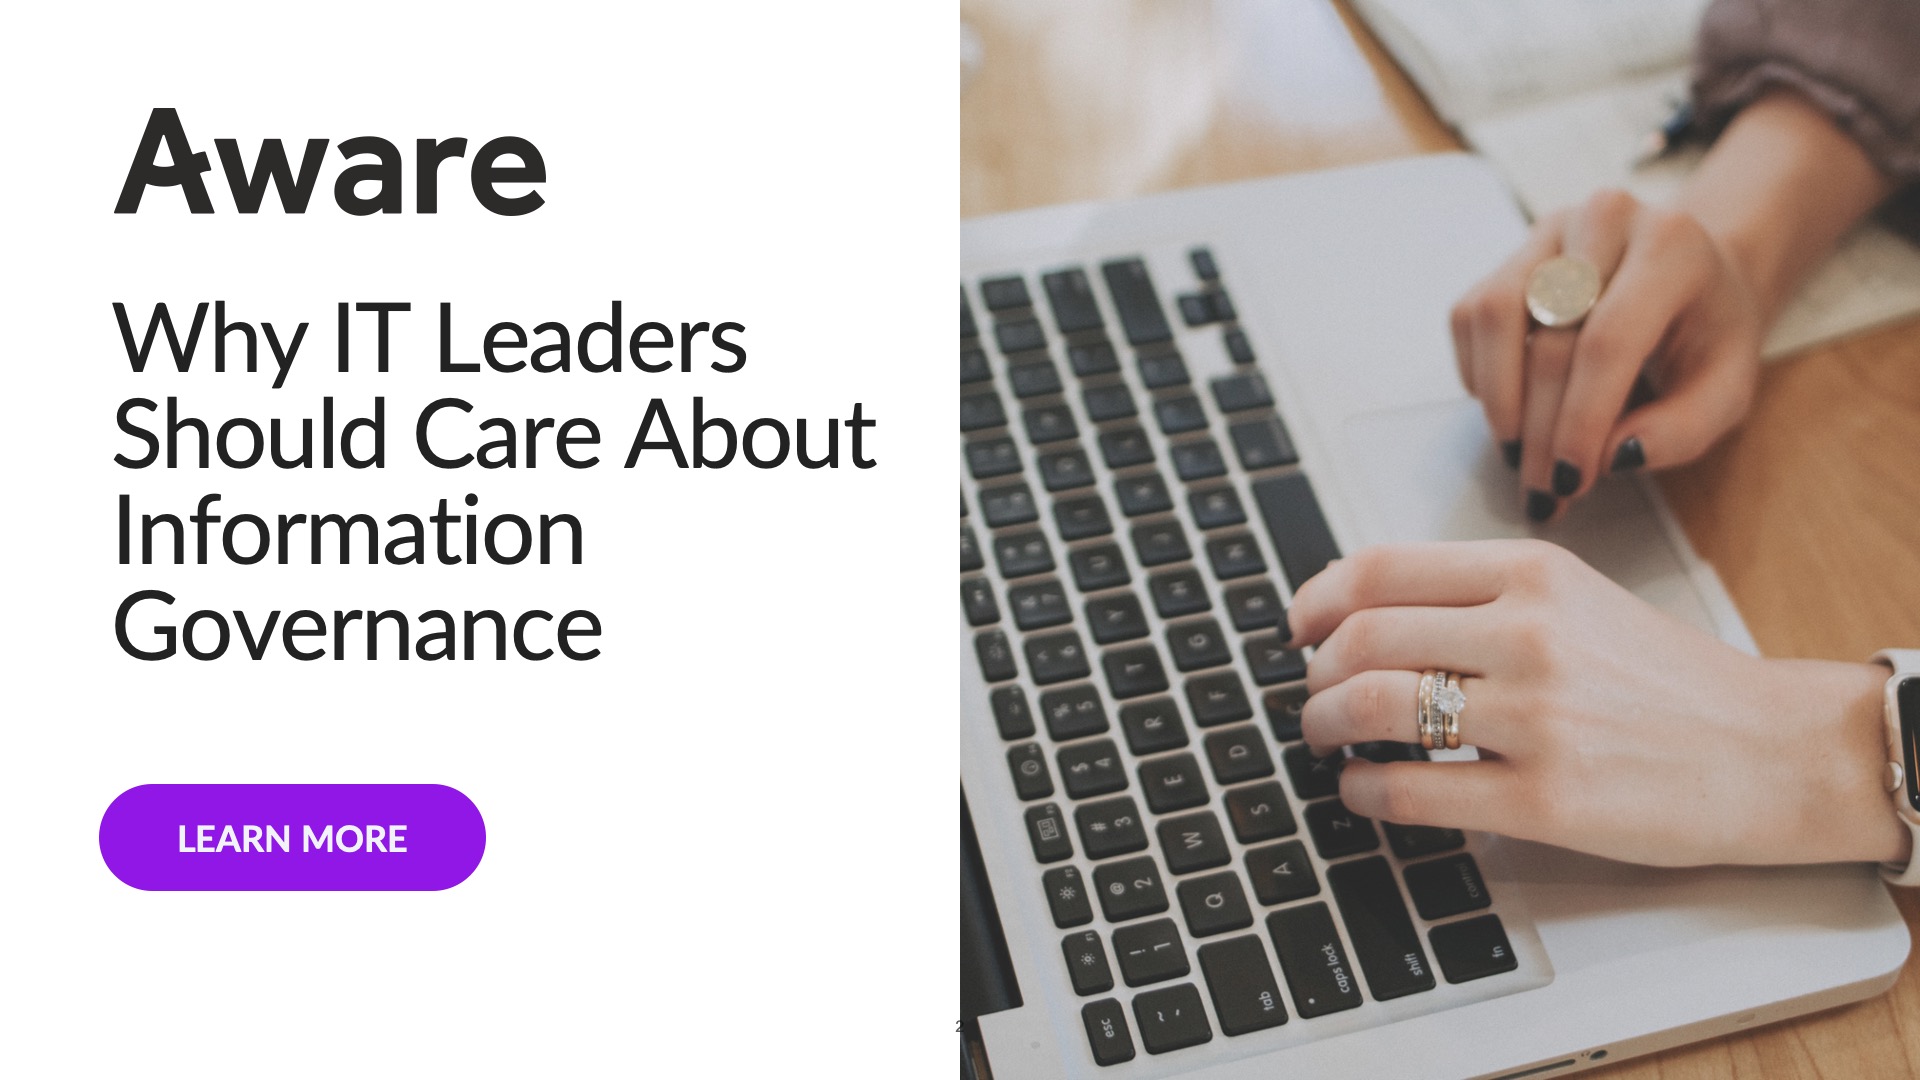 Why IT Leaders Should Care About Information Governance